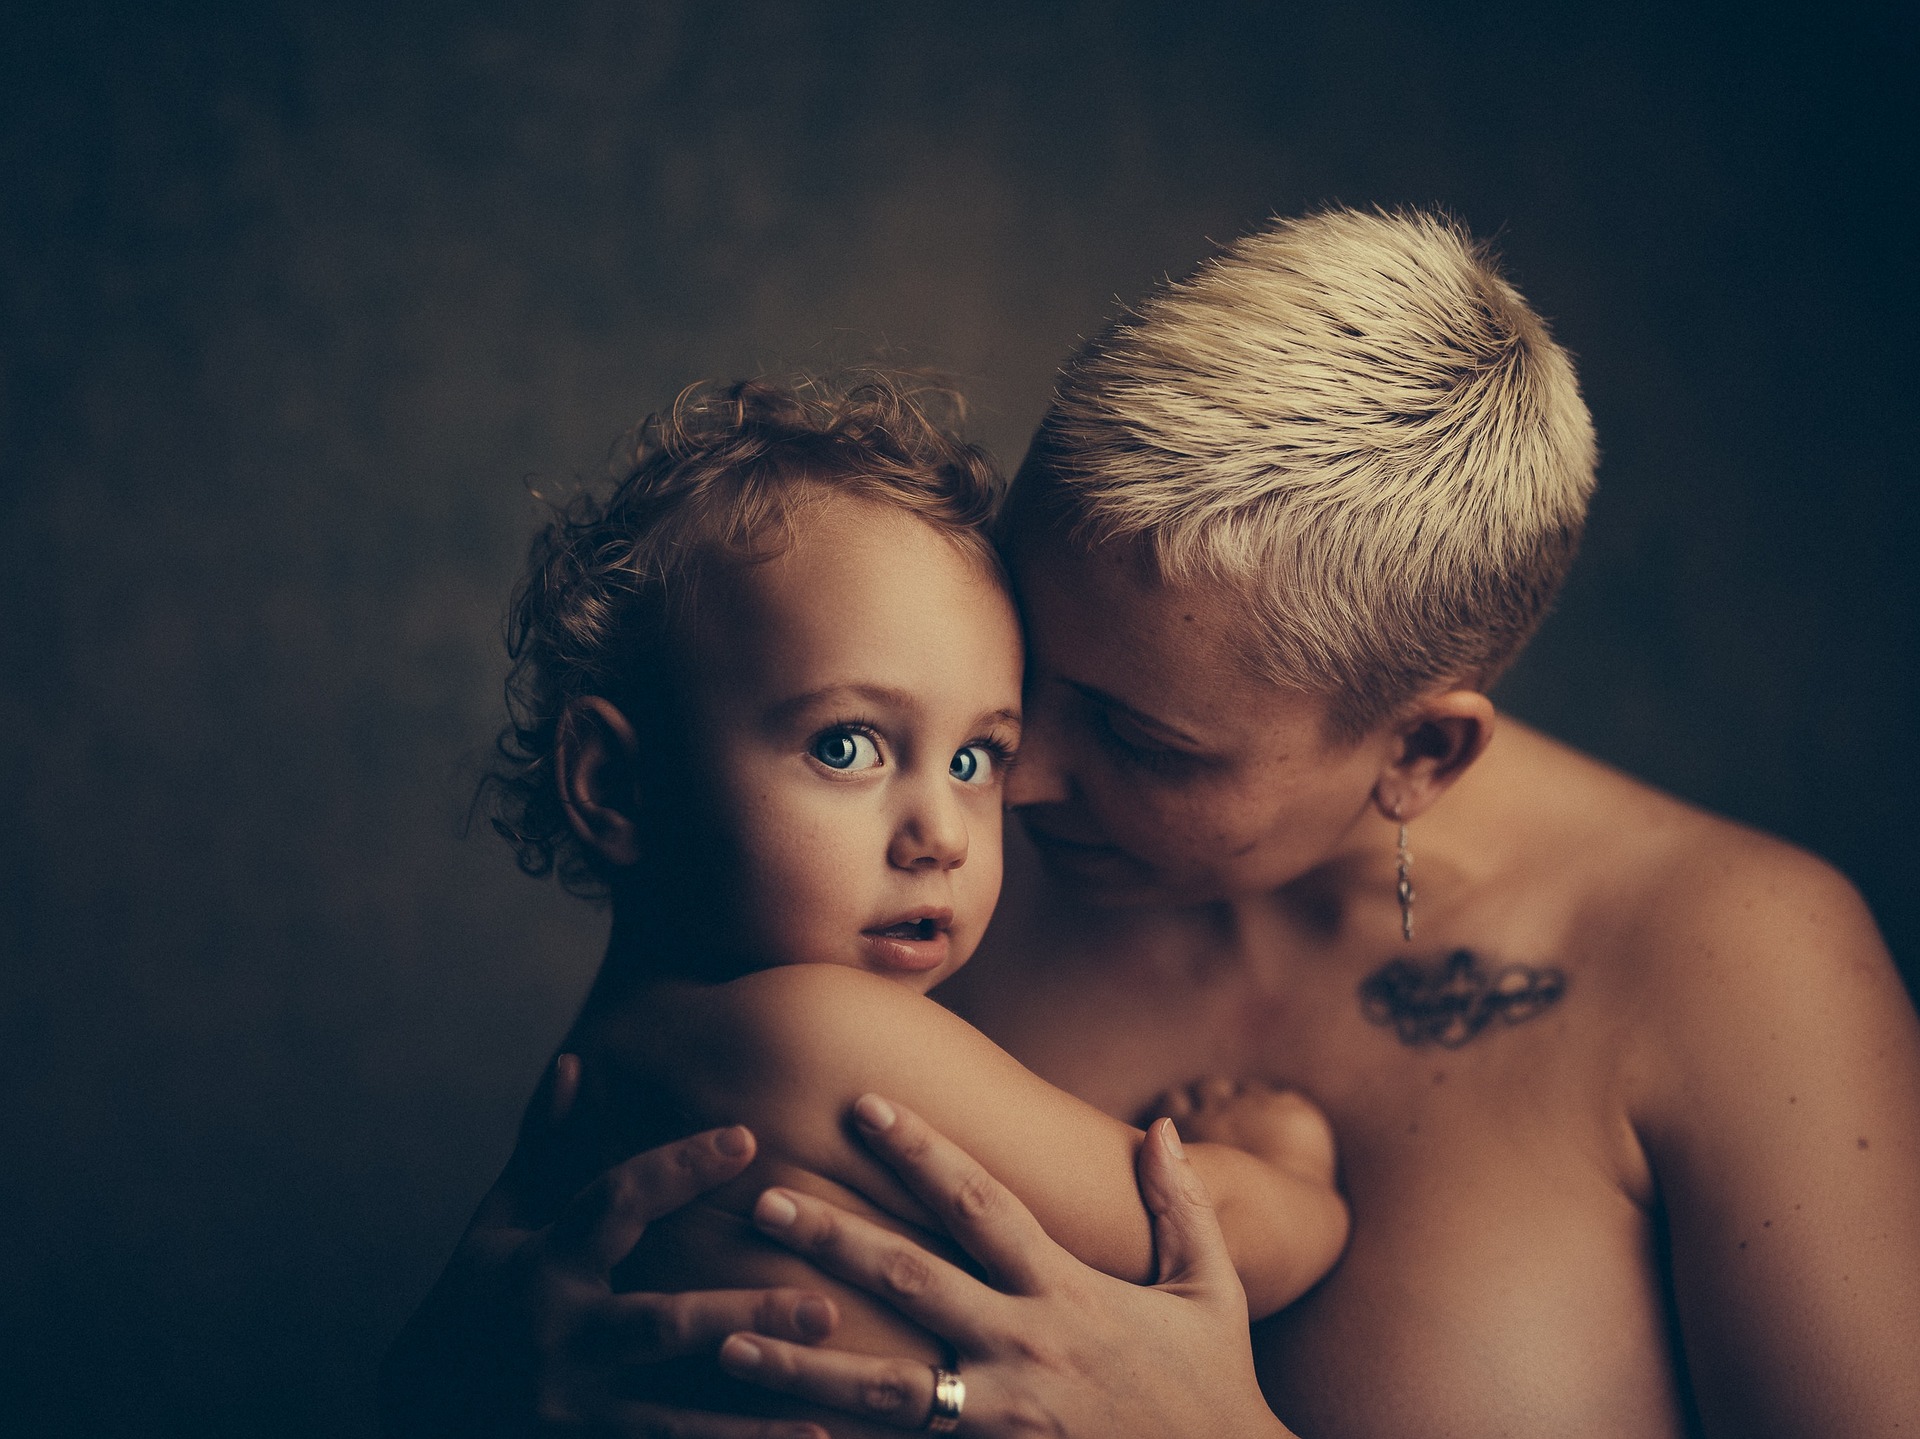 Body modifications piercings, tattoos, and laser removal of tattoos are increasingly popular, but are breastfeeding and body modifications compatible?